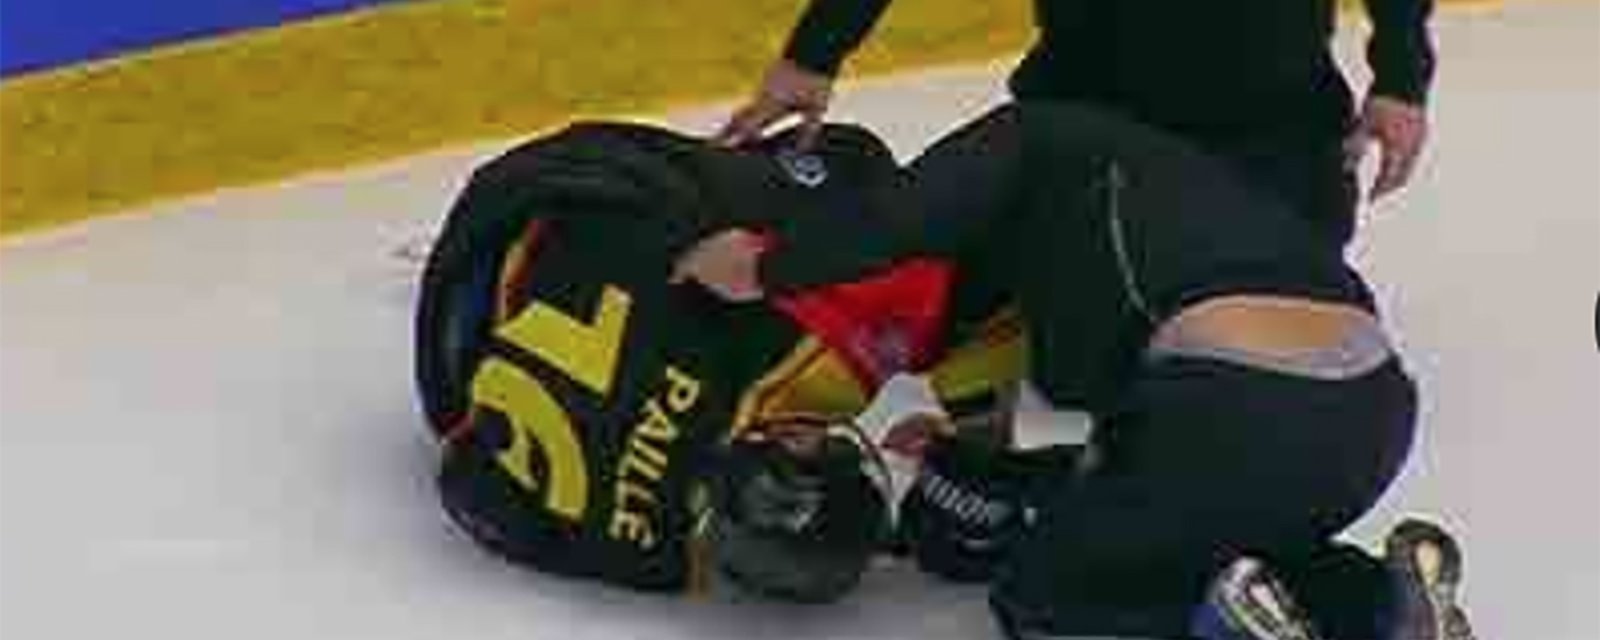 Breaking: Player charged with assault on former NHL first rounder Paille